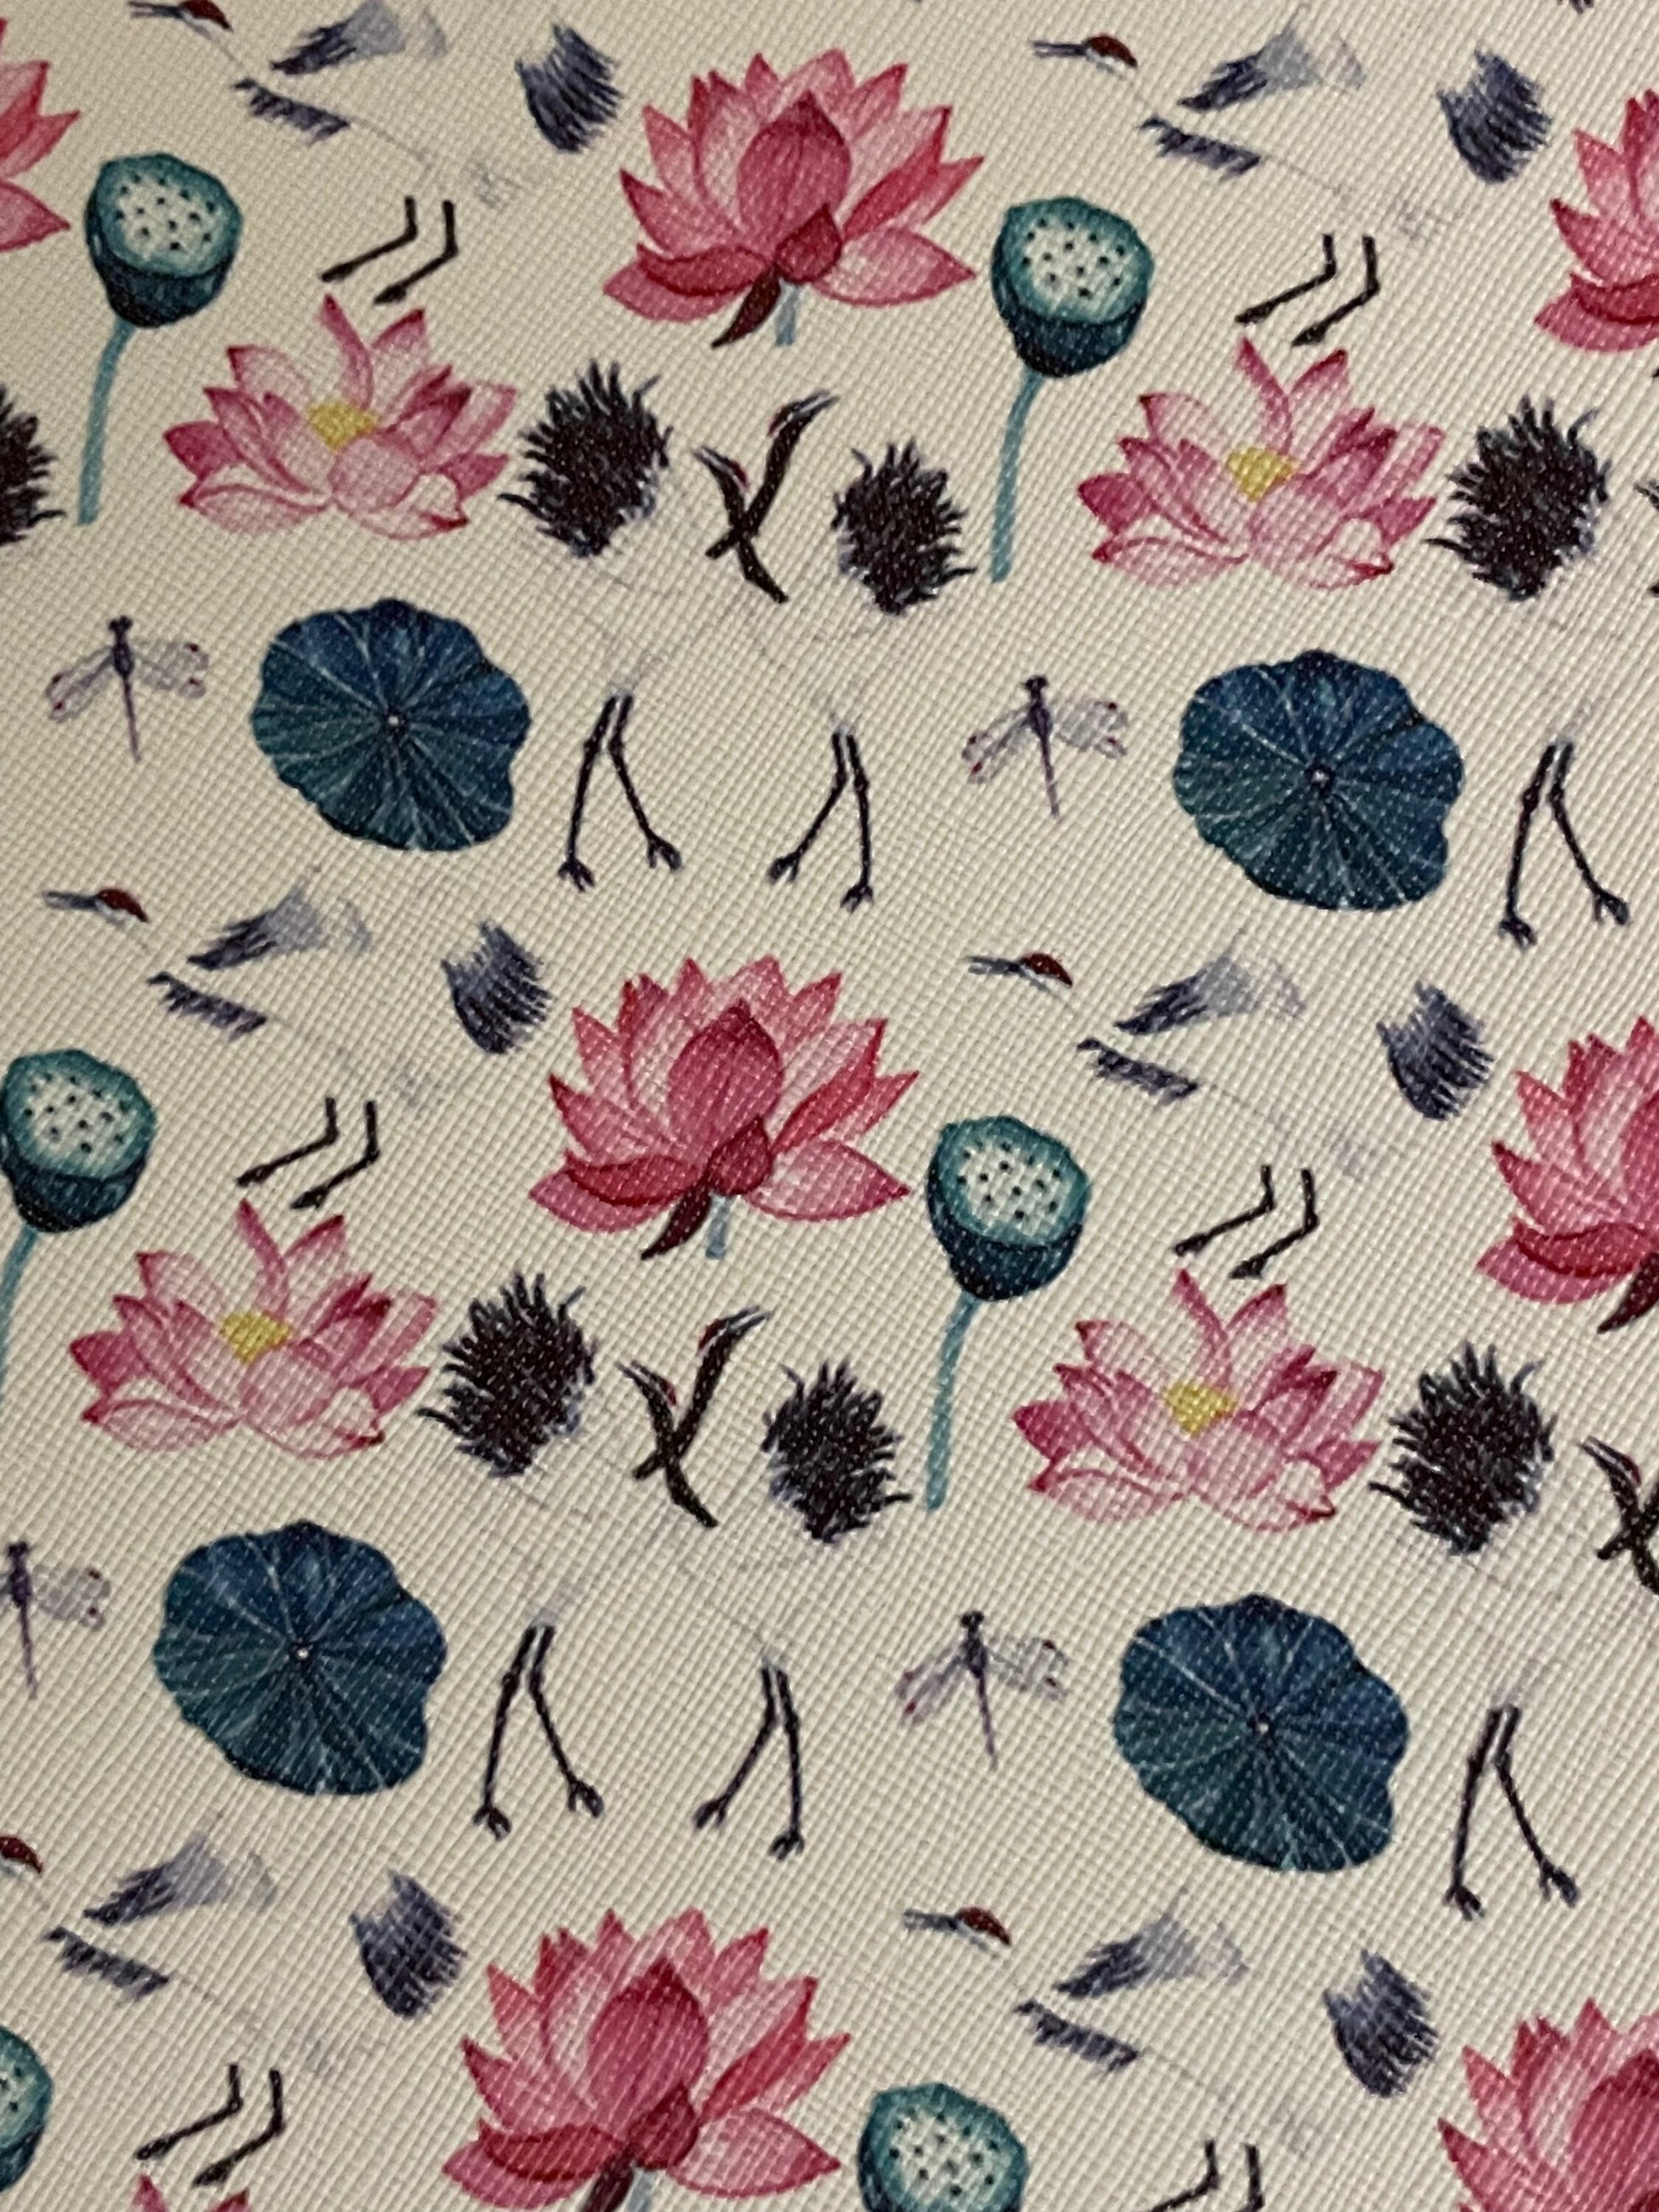 Bird with Lotus flower and dragonfly TheFabricDude